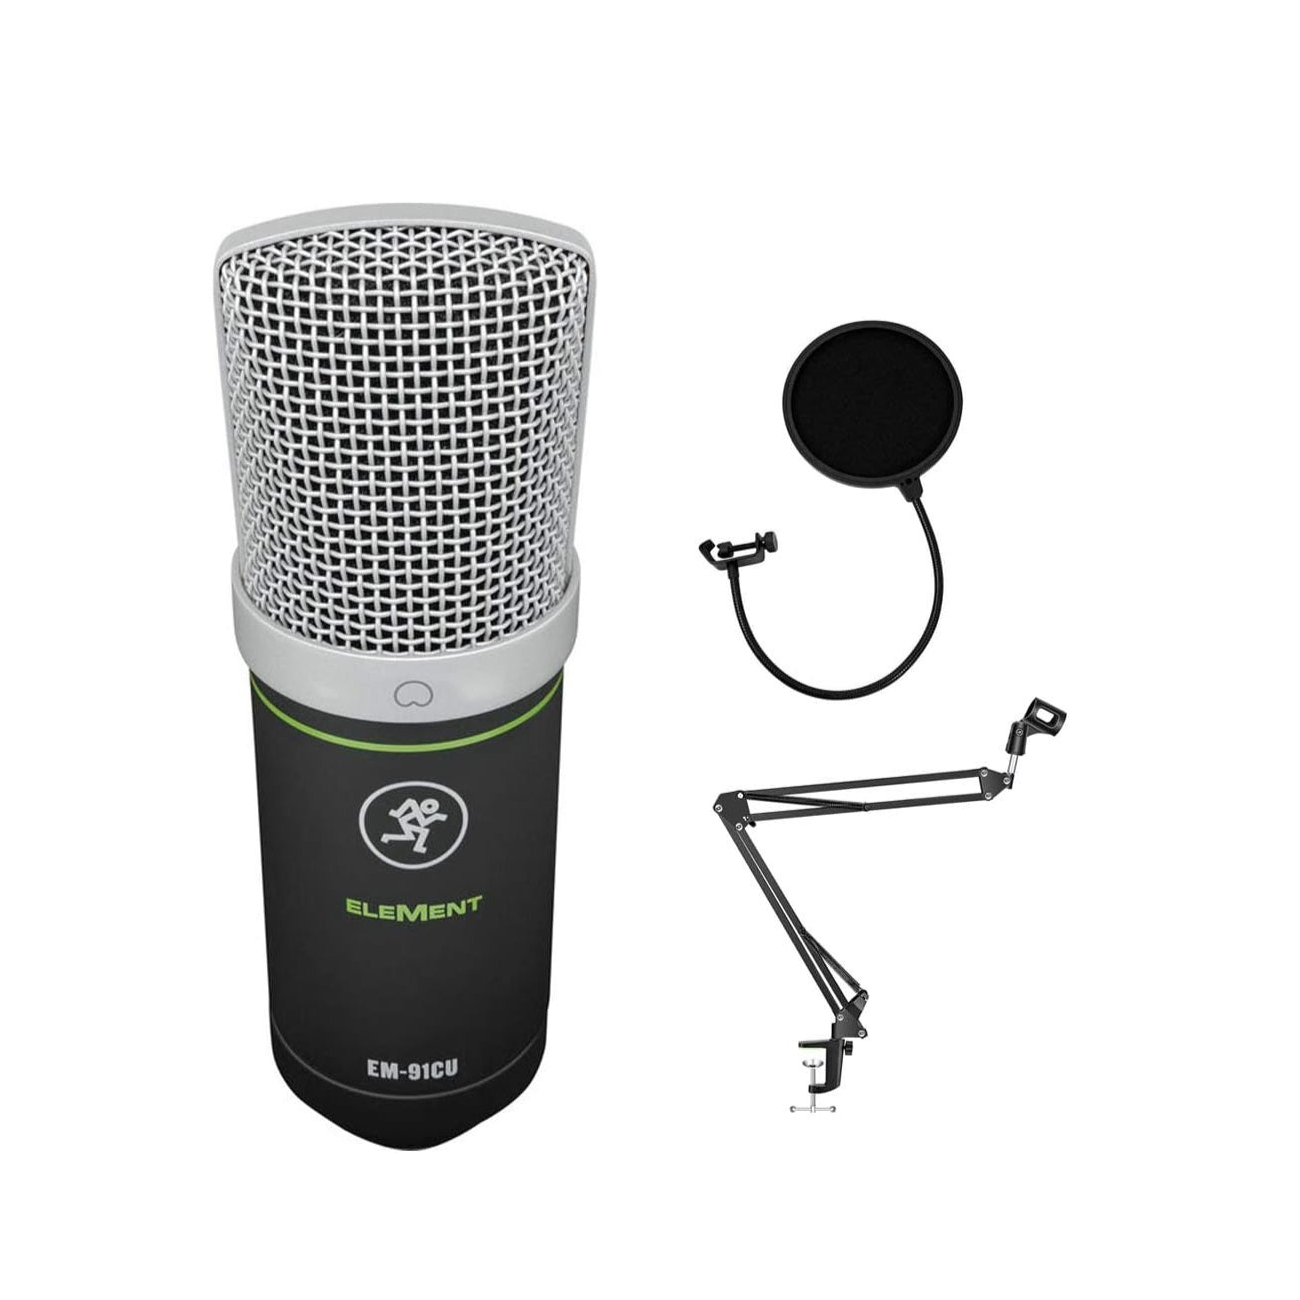 Mackie - EM-91CU+ Large-Diaphragm USB Condenser Cardioid Microphone Includes Shockmount with Headphone Output and Onboard Mute